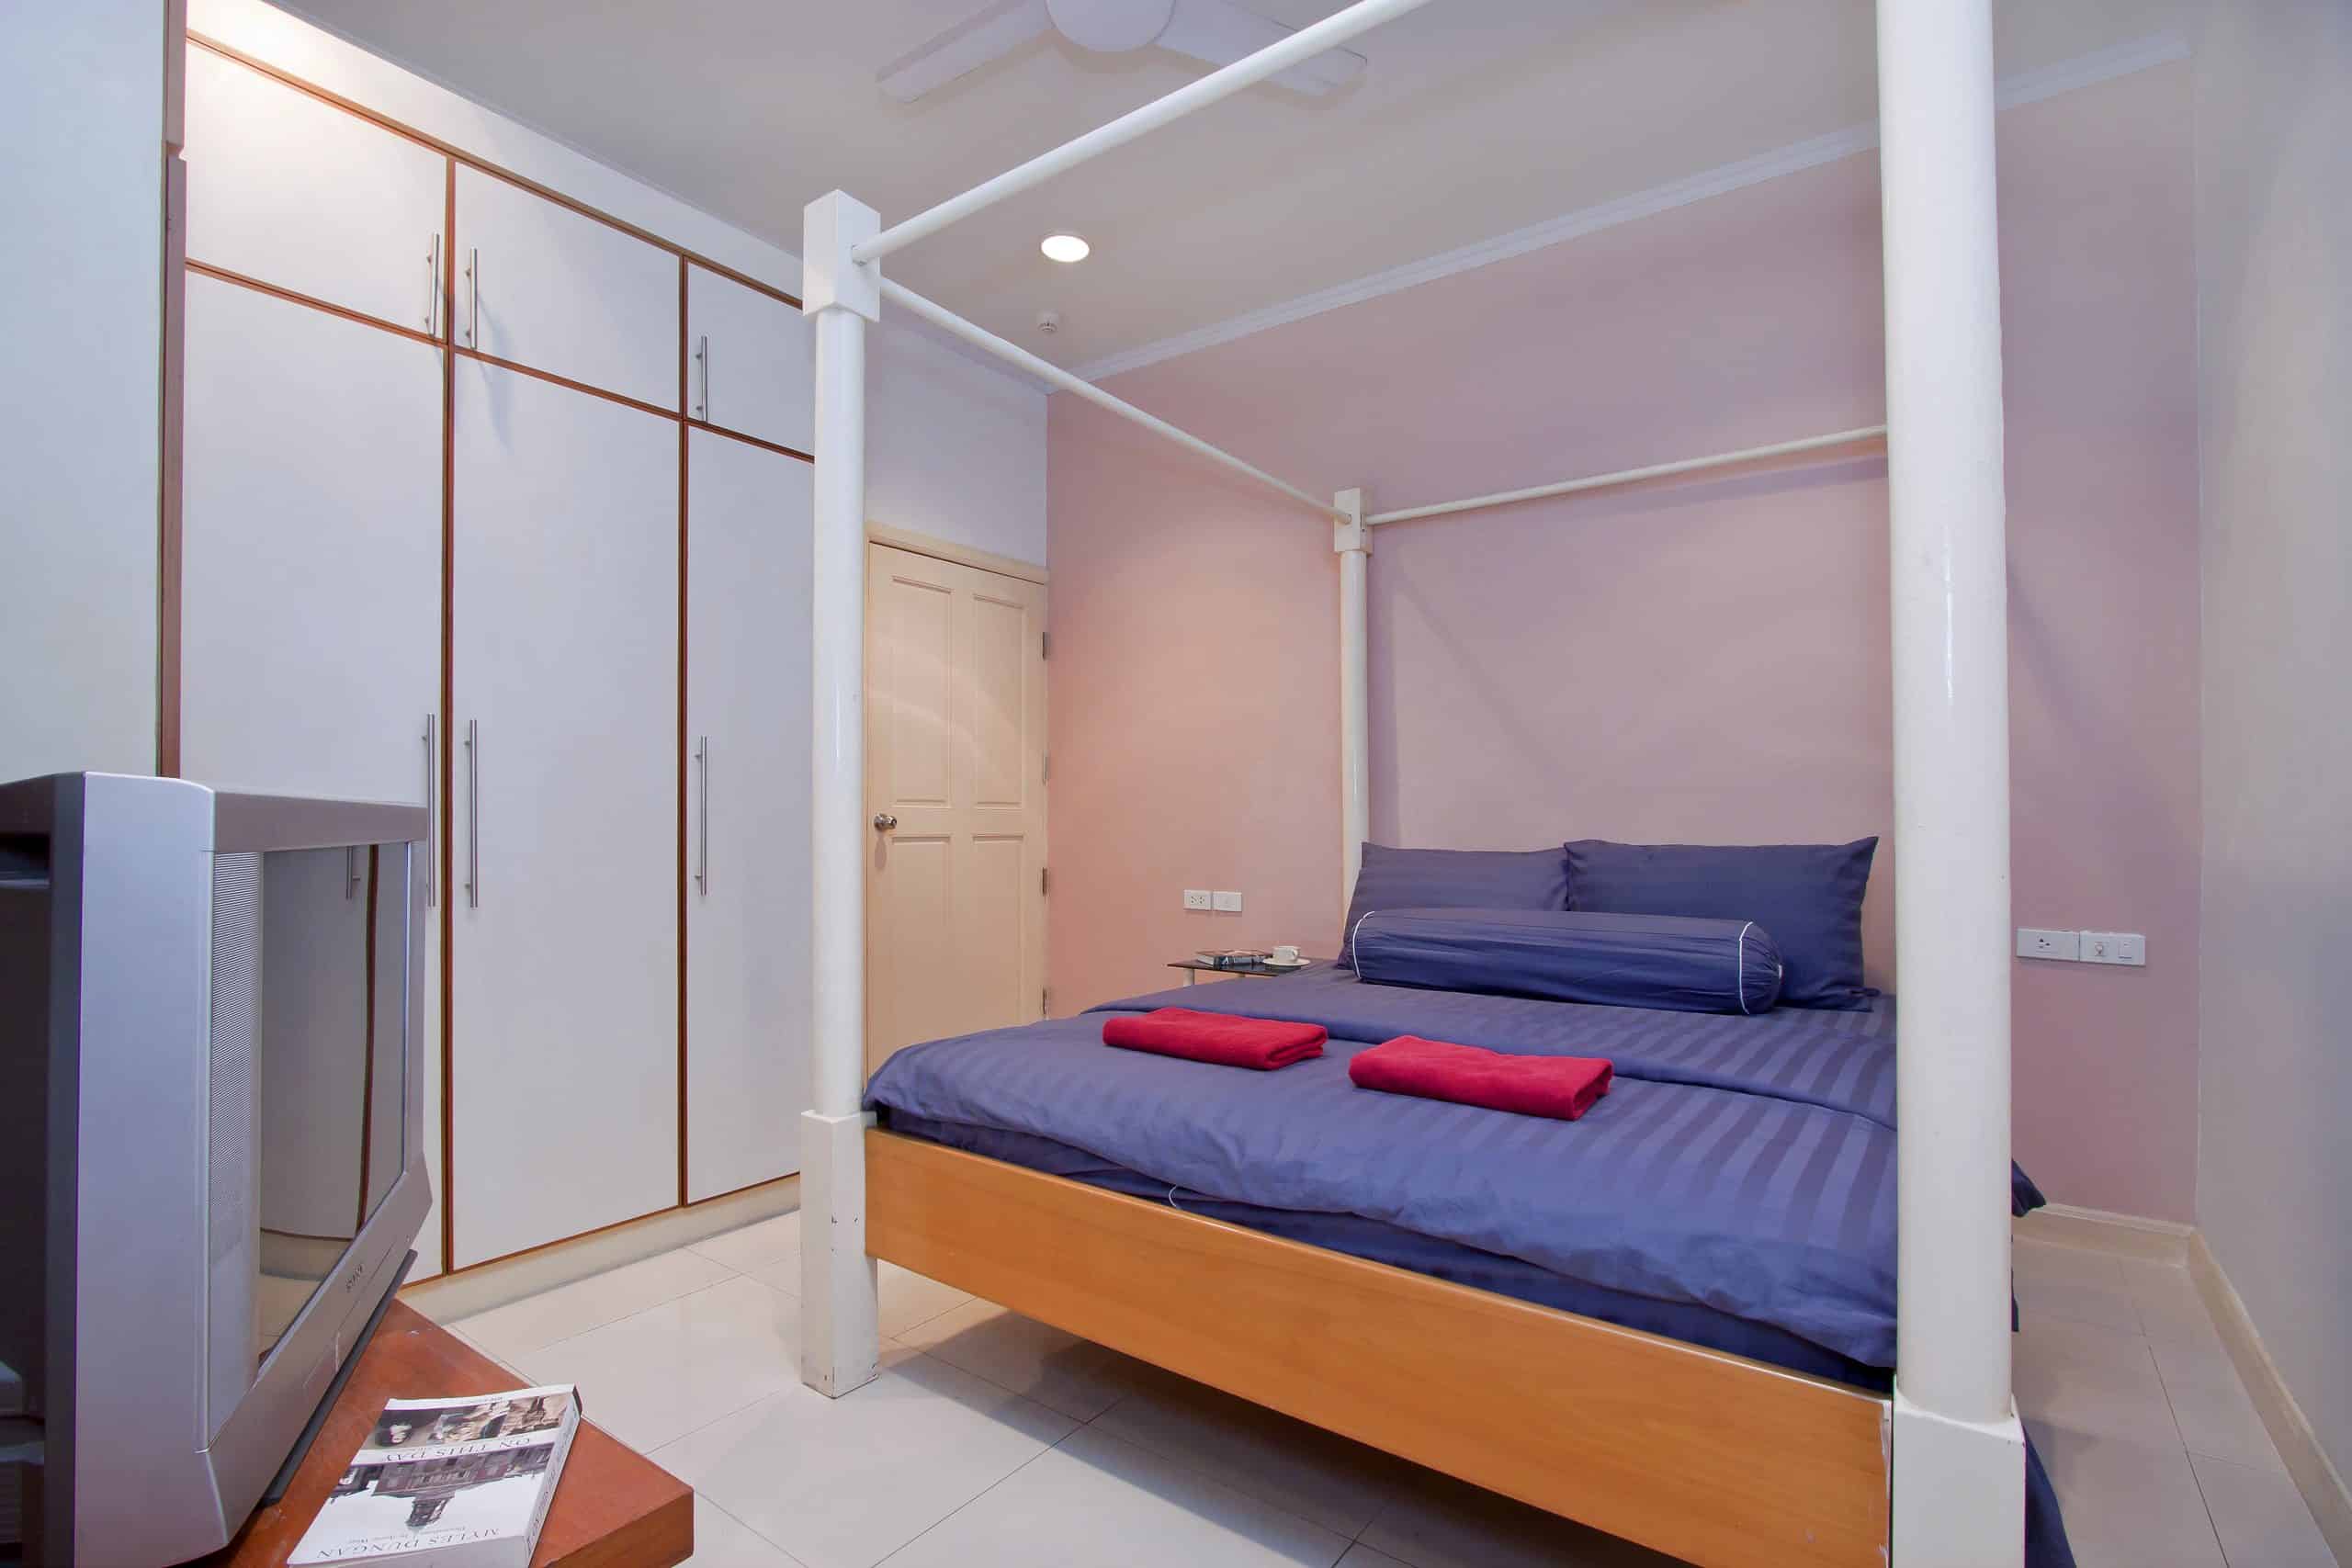 Experience the ultimate holiday stay in this comfortable and stylish studio apartment in Pattaya, offering a cozy bed, functional kitchenette, private shower, air conditioning, and Wi-Fi for your convenience